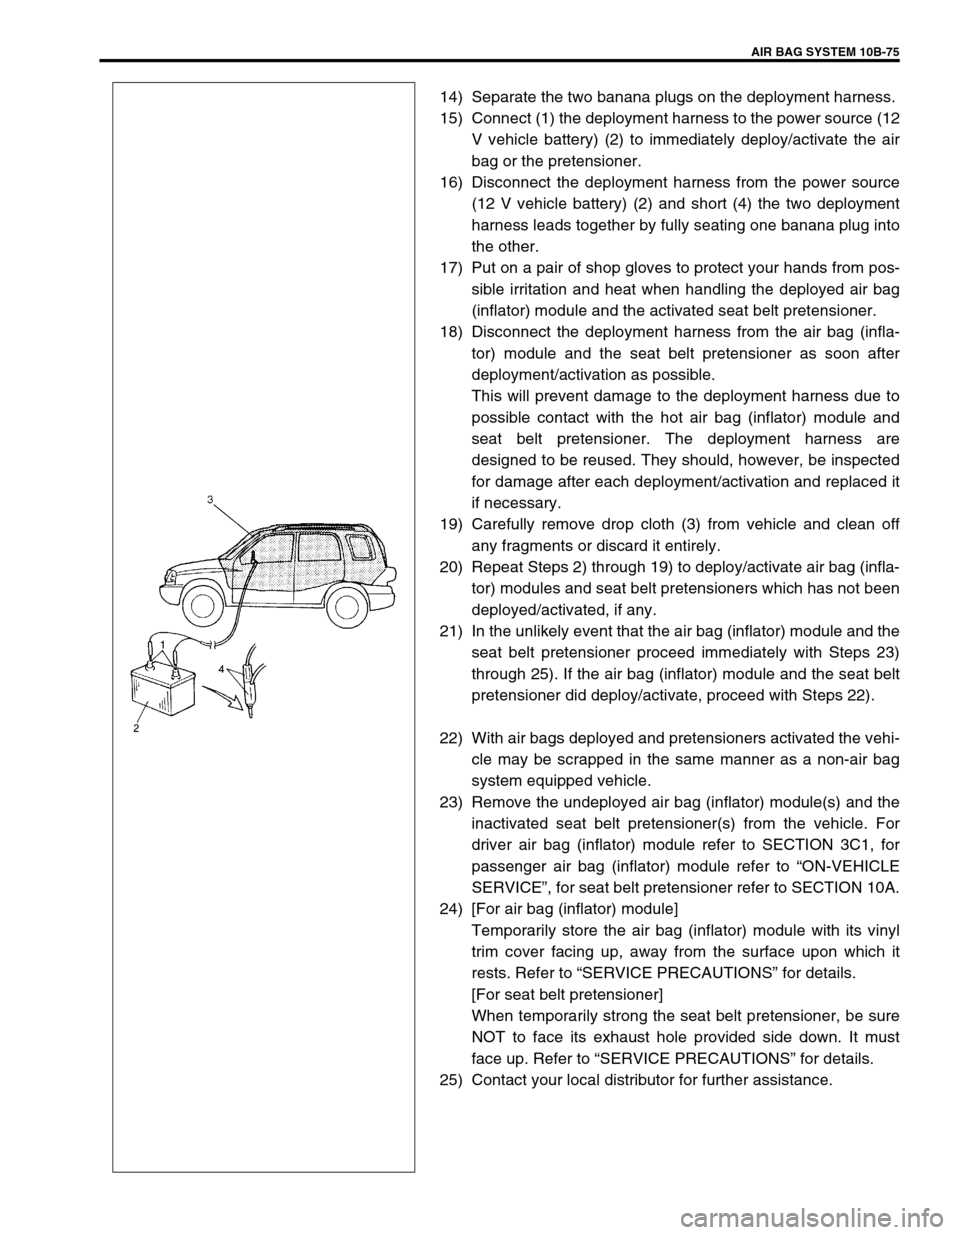 SUZUKI GRAND VITARA 2001 2.G Owners Manual AIR BAG SYSTEM 10B-75
14) Separate the two banana plugs on the deployment harness.
15) Connect (1) the deployment harness to the power source (12
V vehicle battery) (2) to immediately deploy/activate 